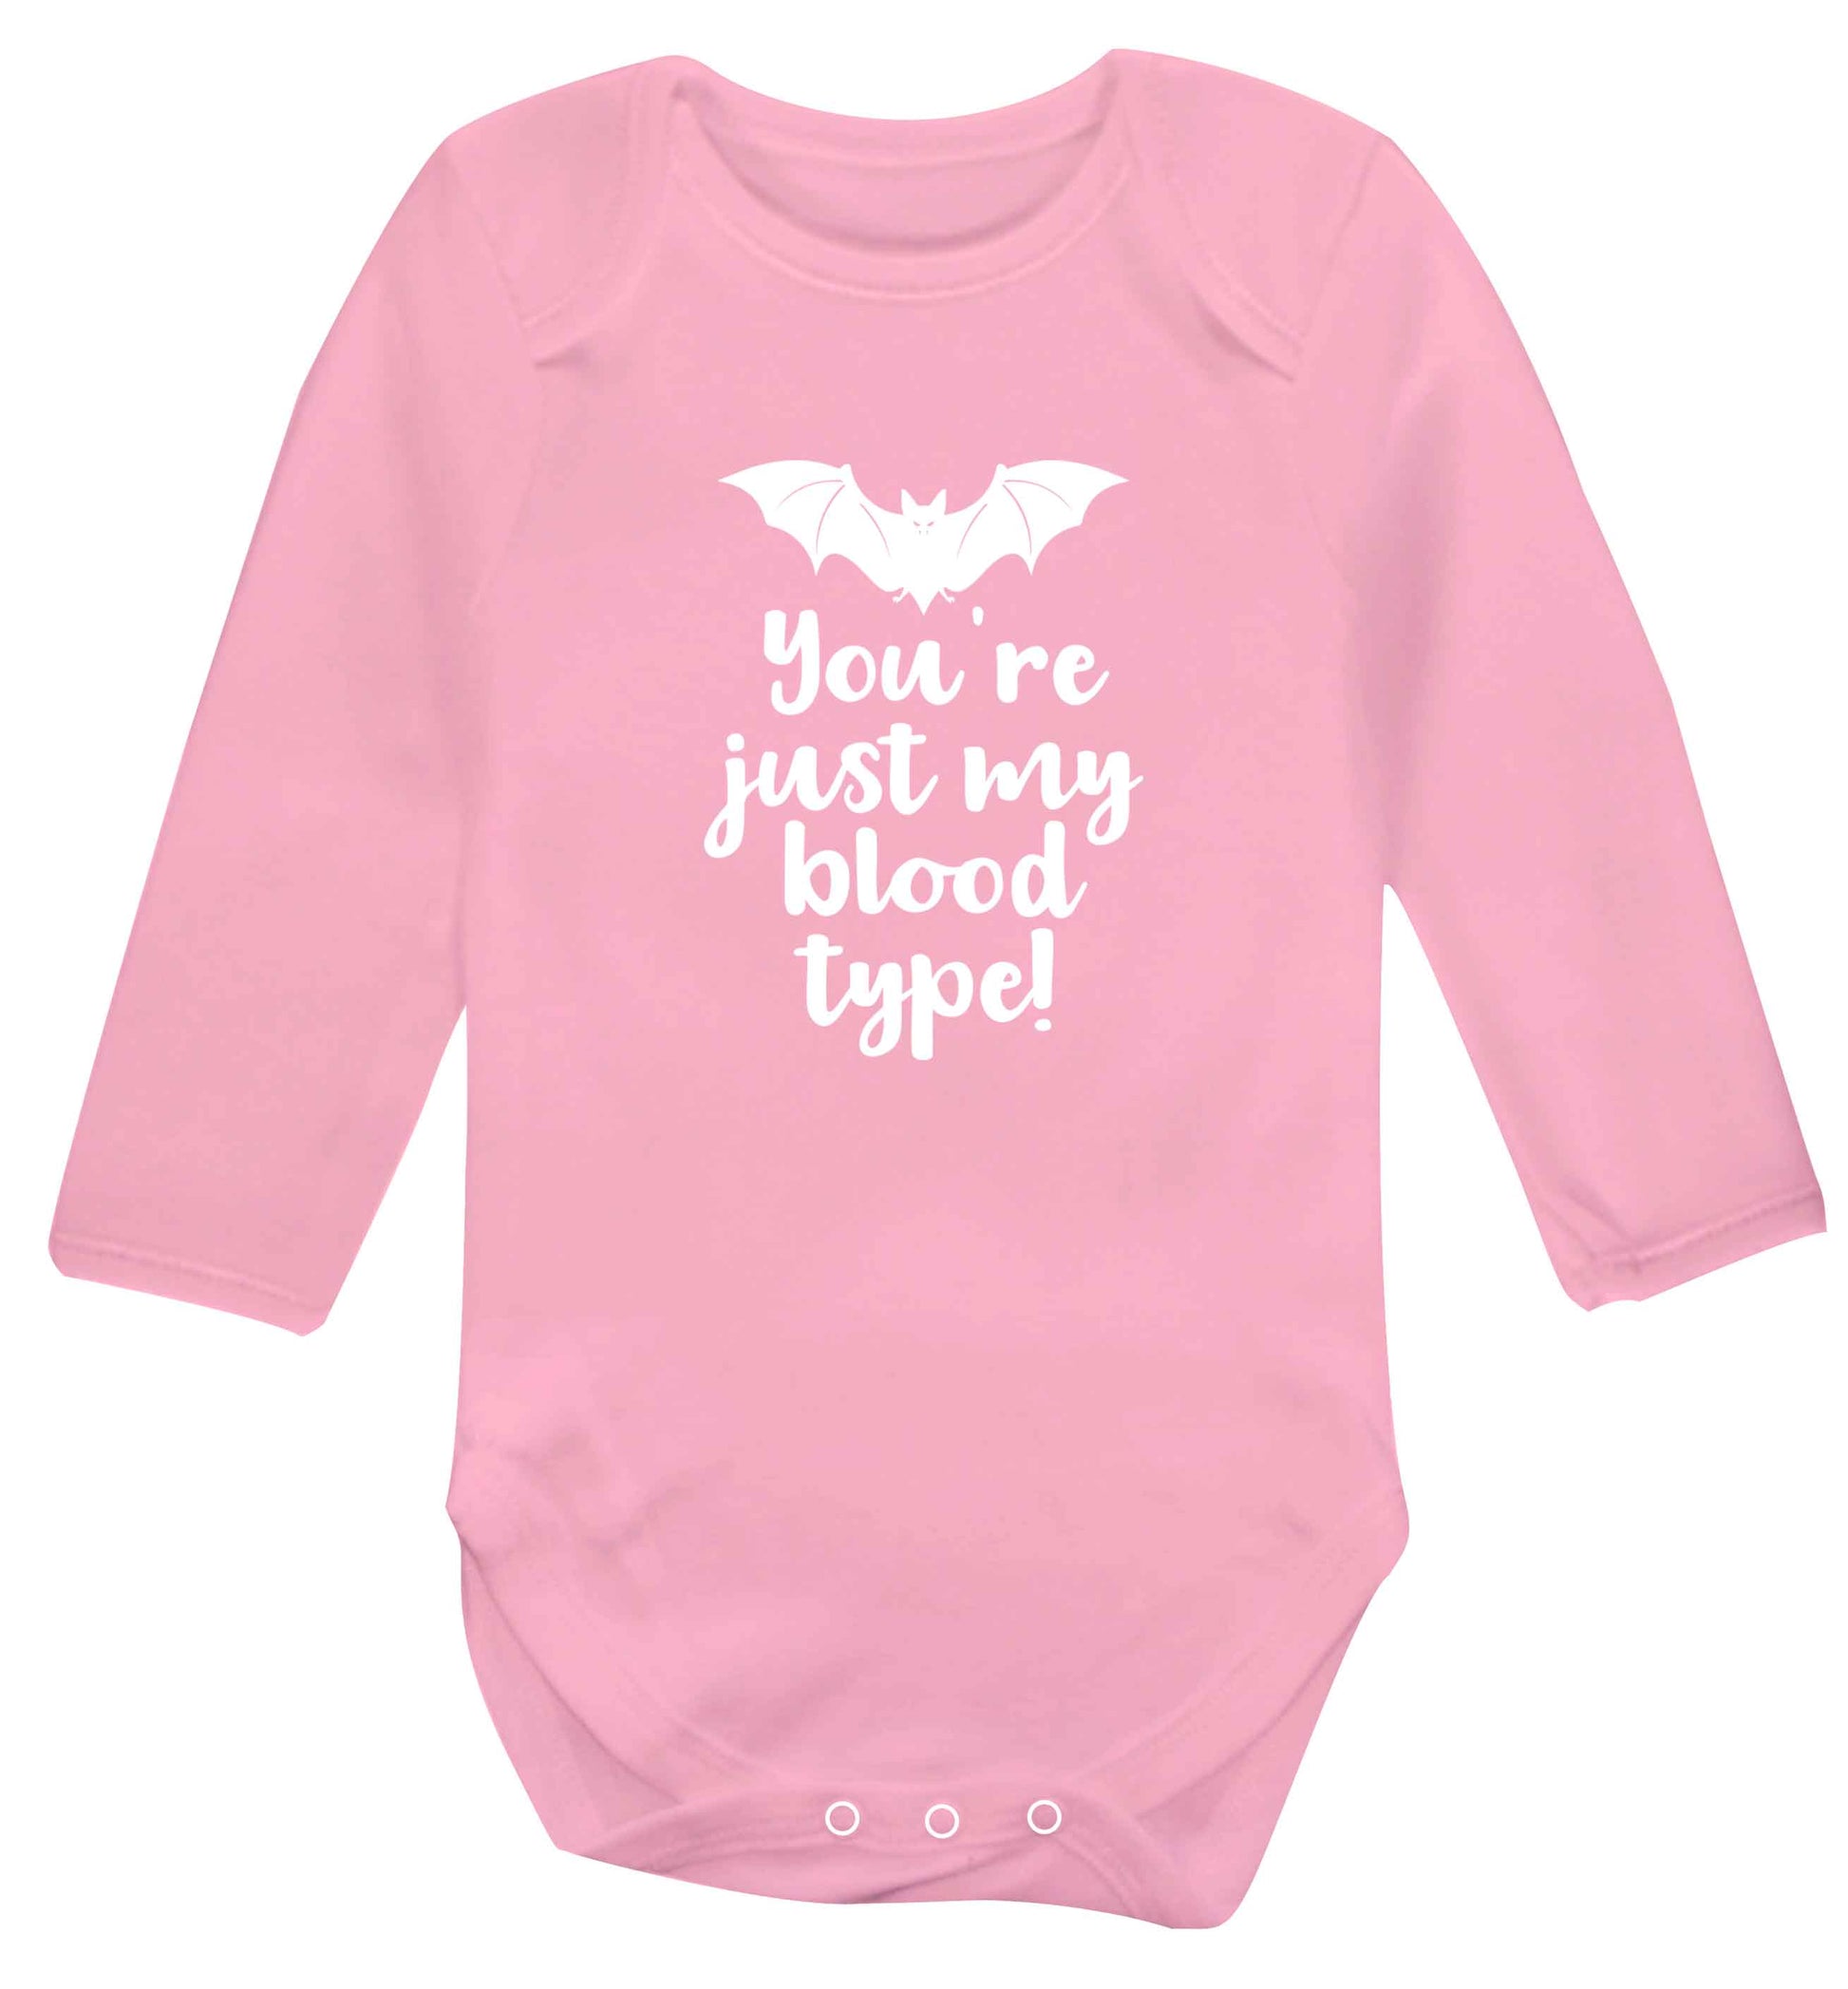 You're just my blood type baby vest long sleeved pale pink 6-12 months